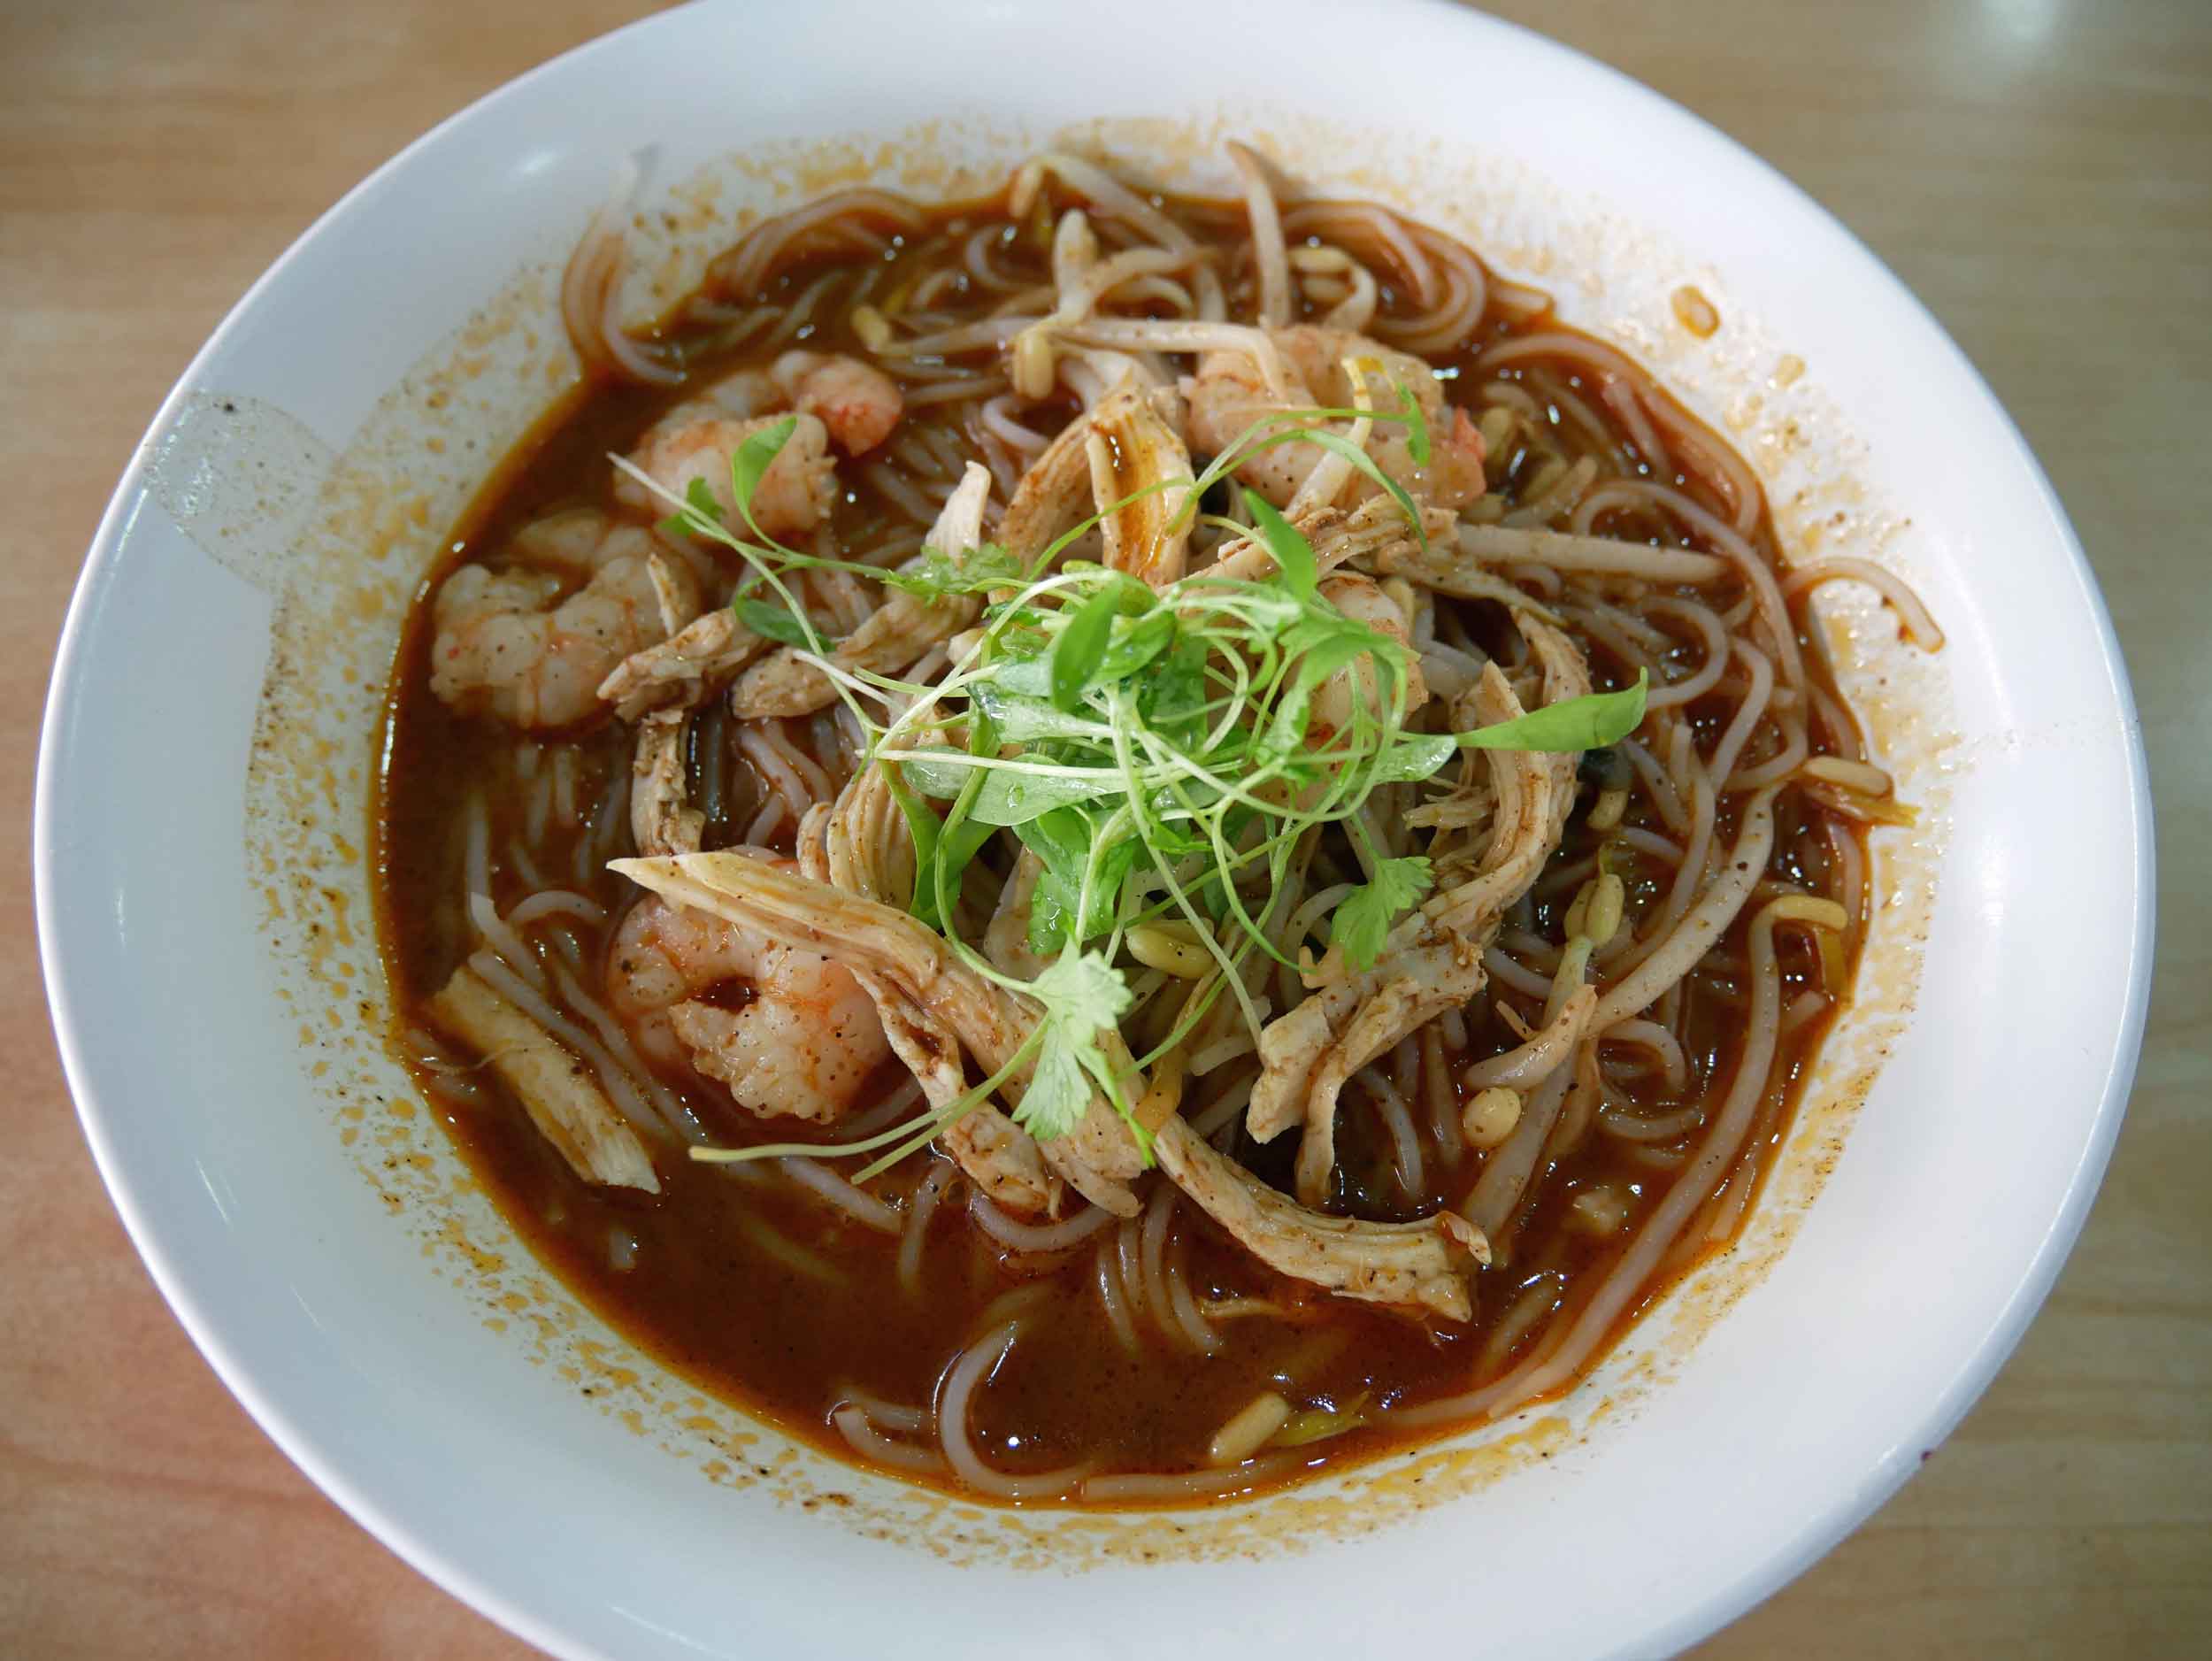  The prawn laksa here is spicy and rich, really getting you ready for the heat of the day ahead on Borneo.&nbsp; 